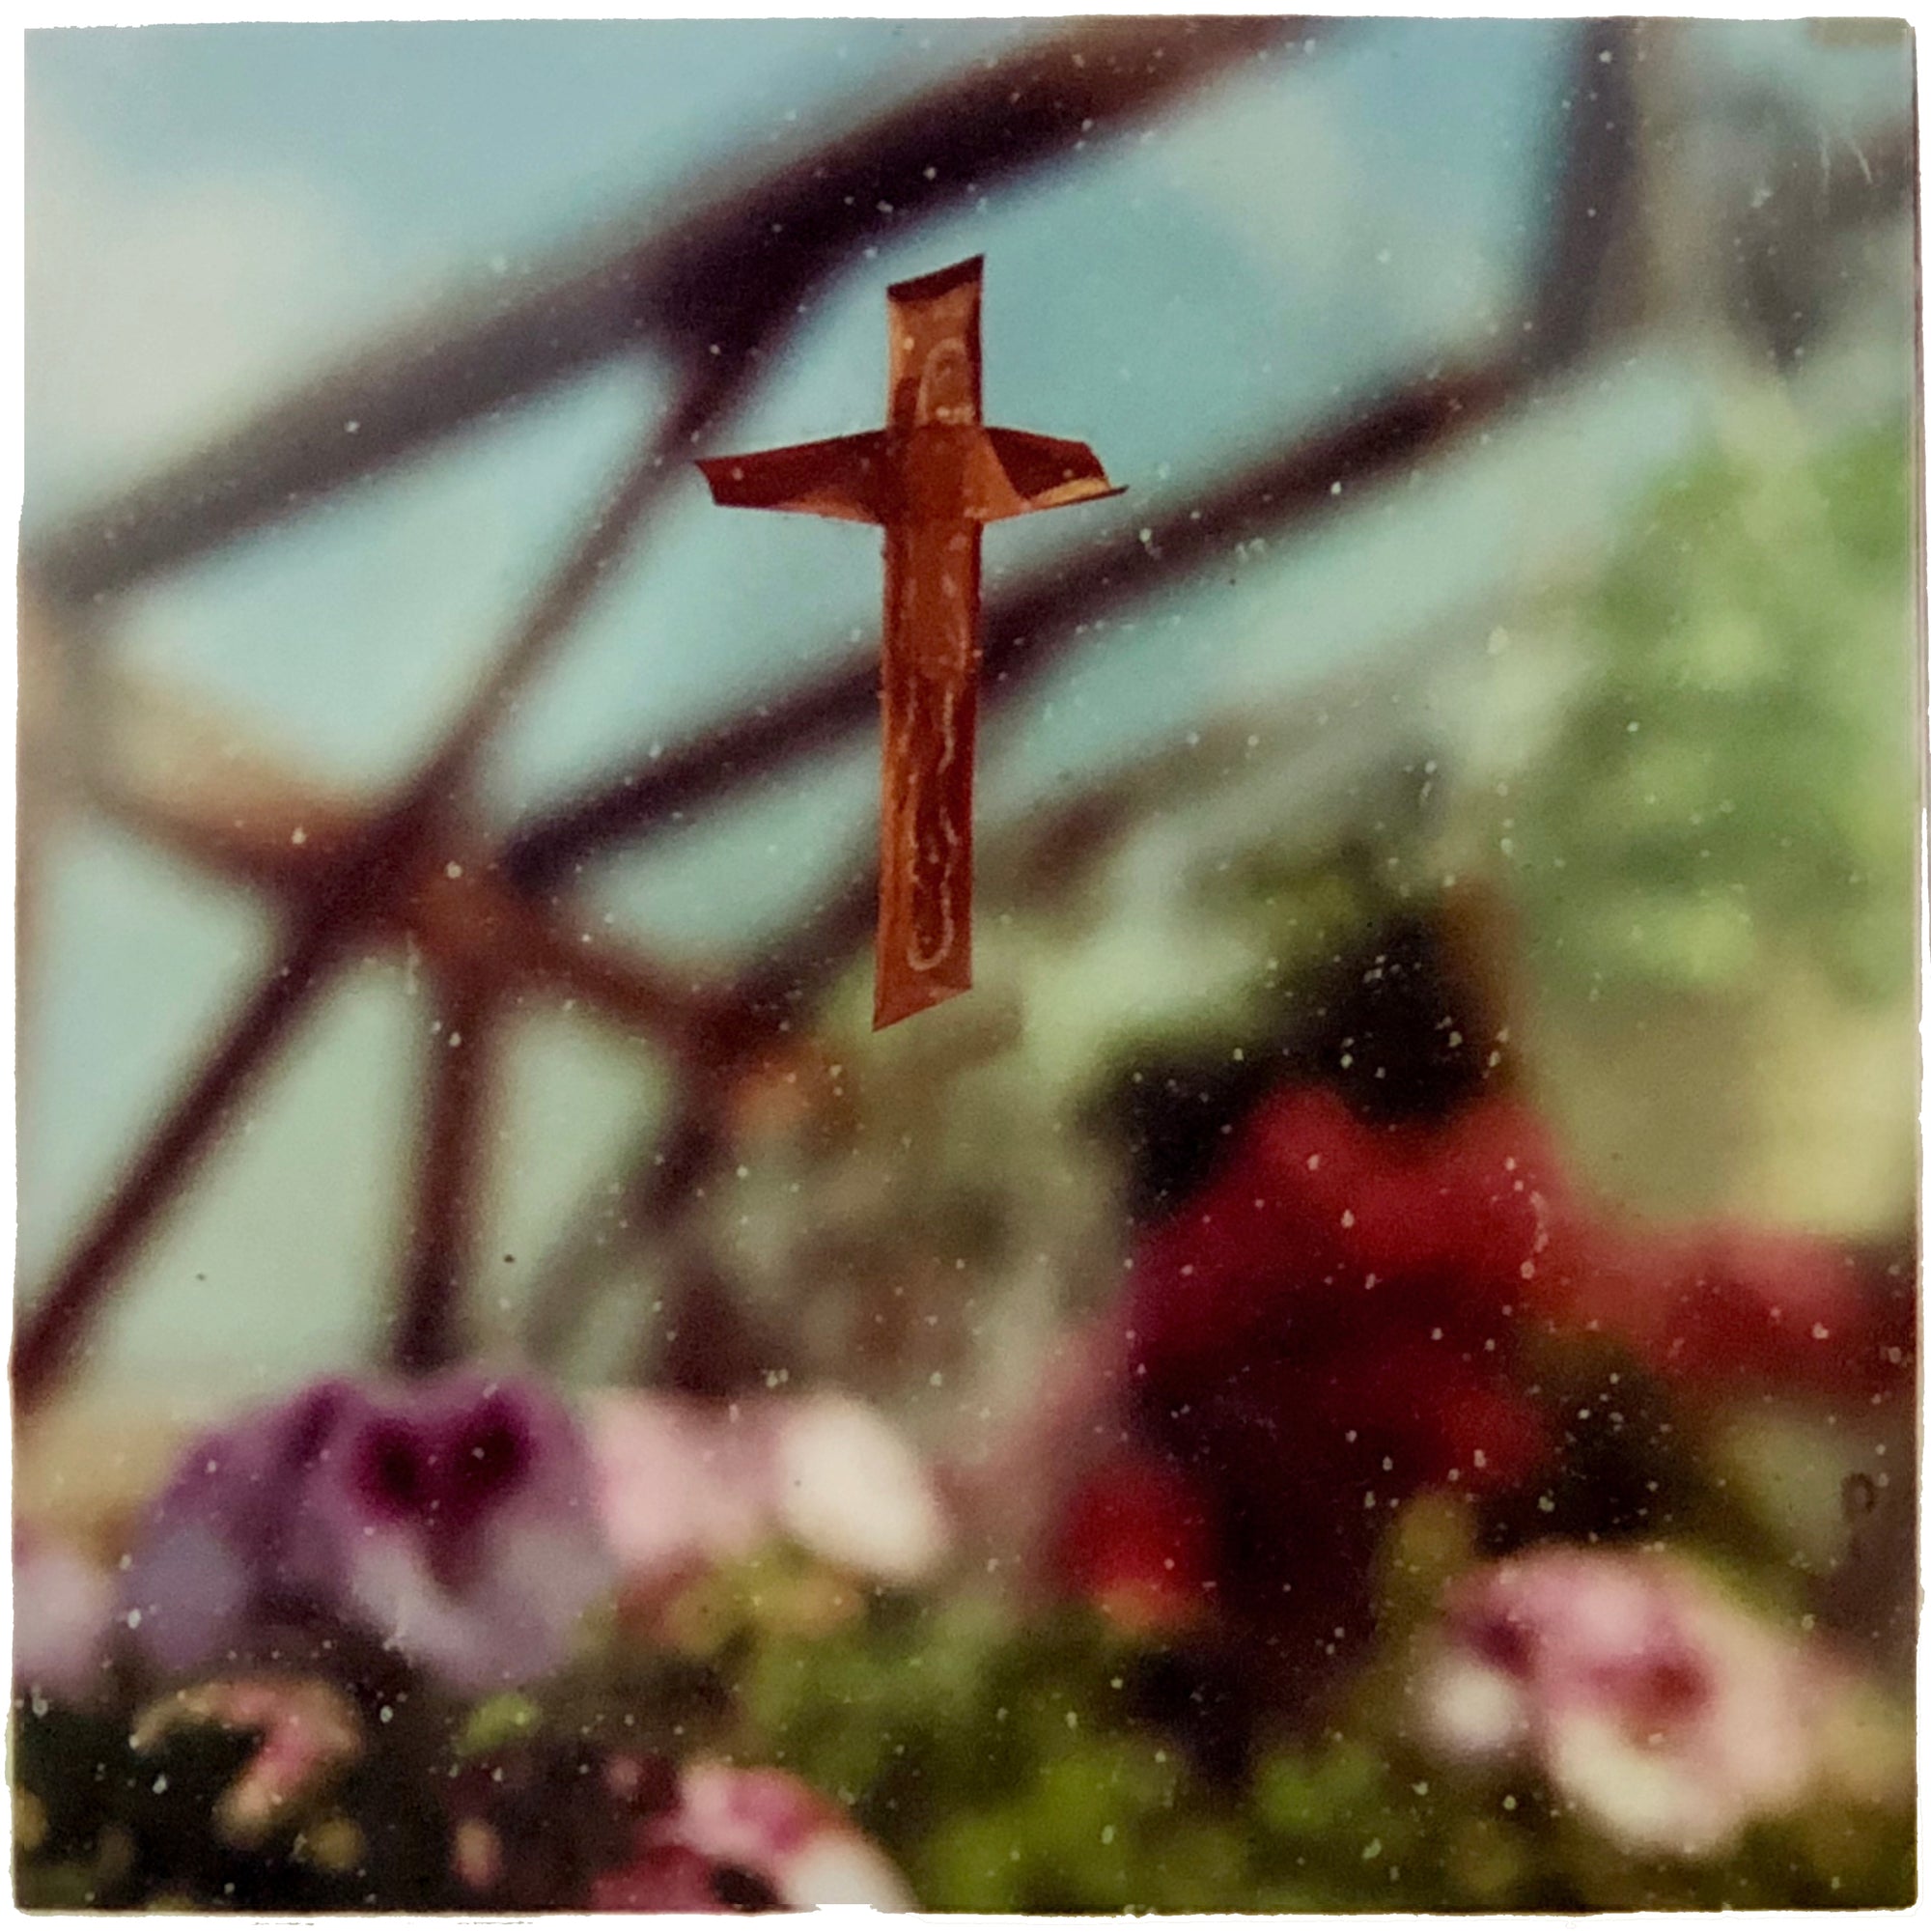 Abstract floral photograph with a crucifix in focus.